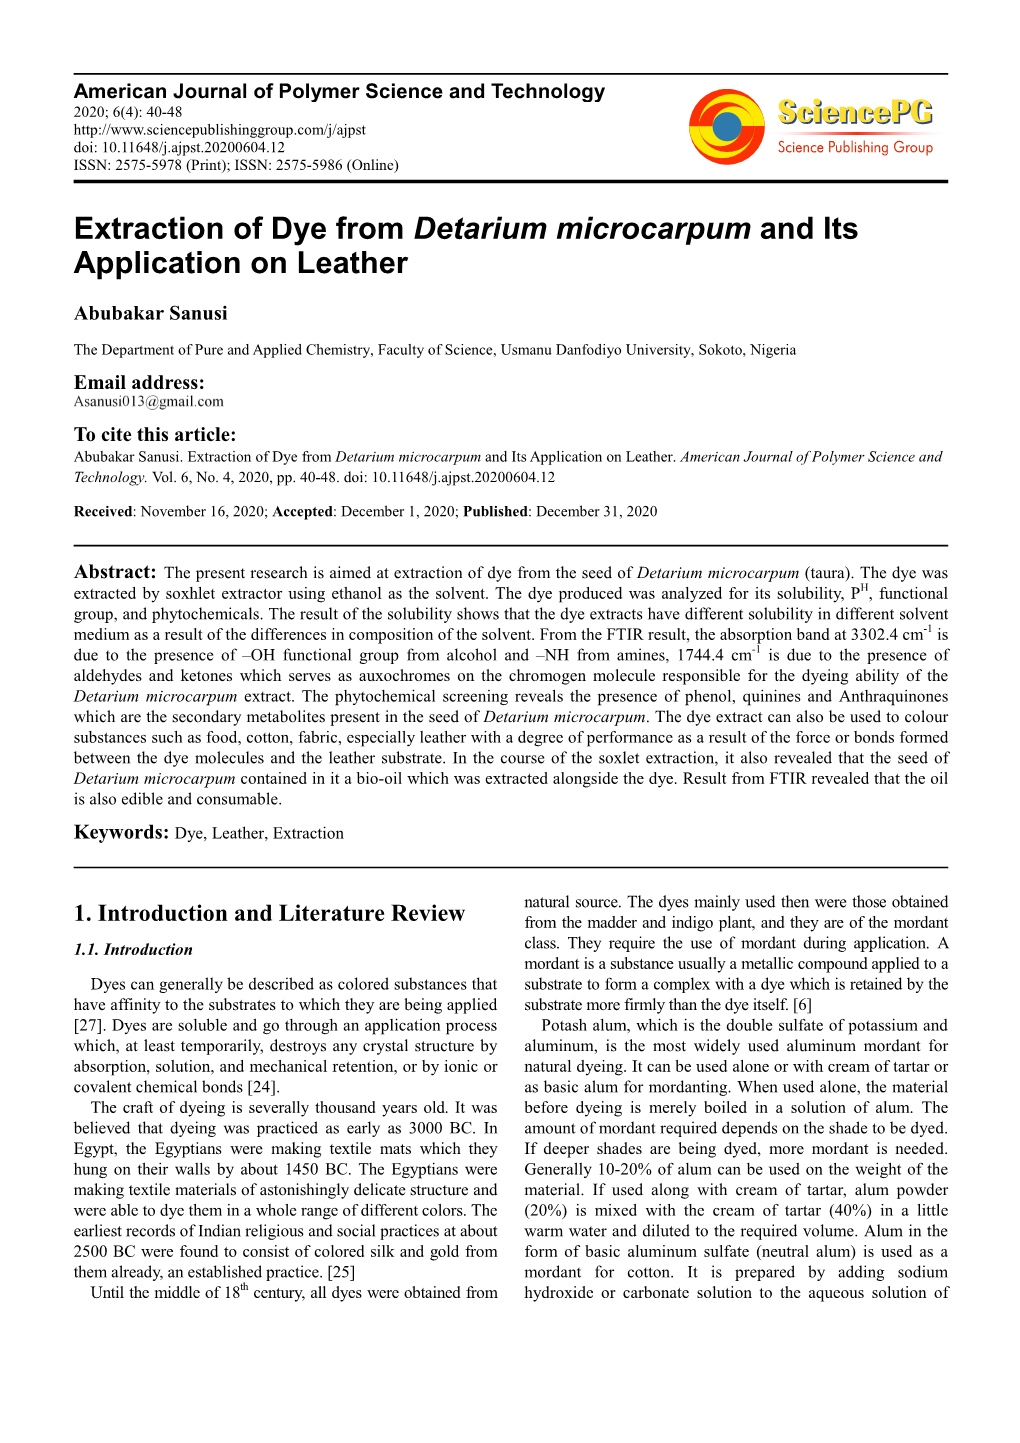 Extraction of Dye from Detarium Microcarpum and Its Application on Leather